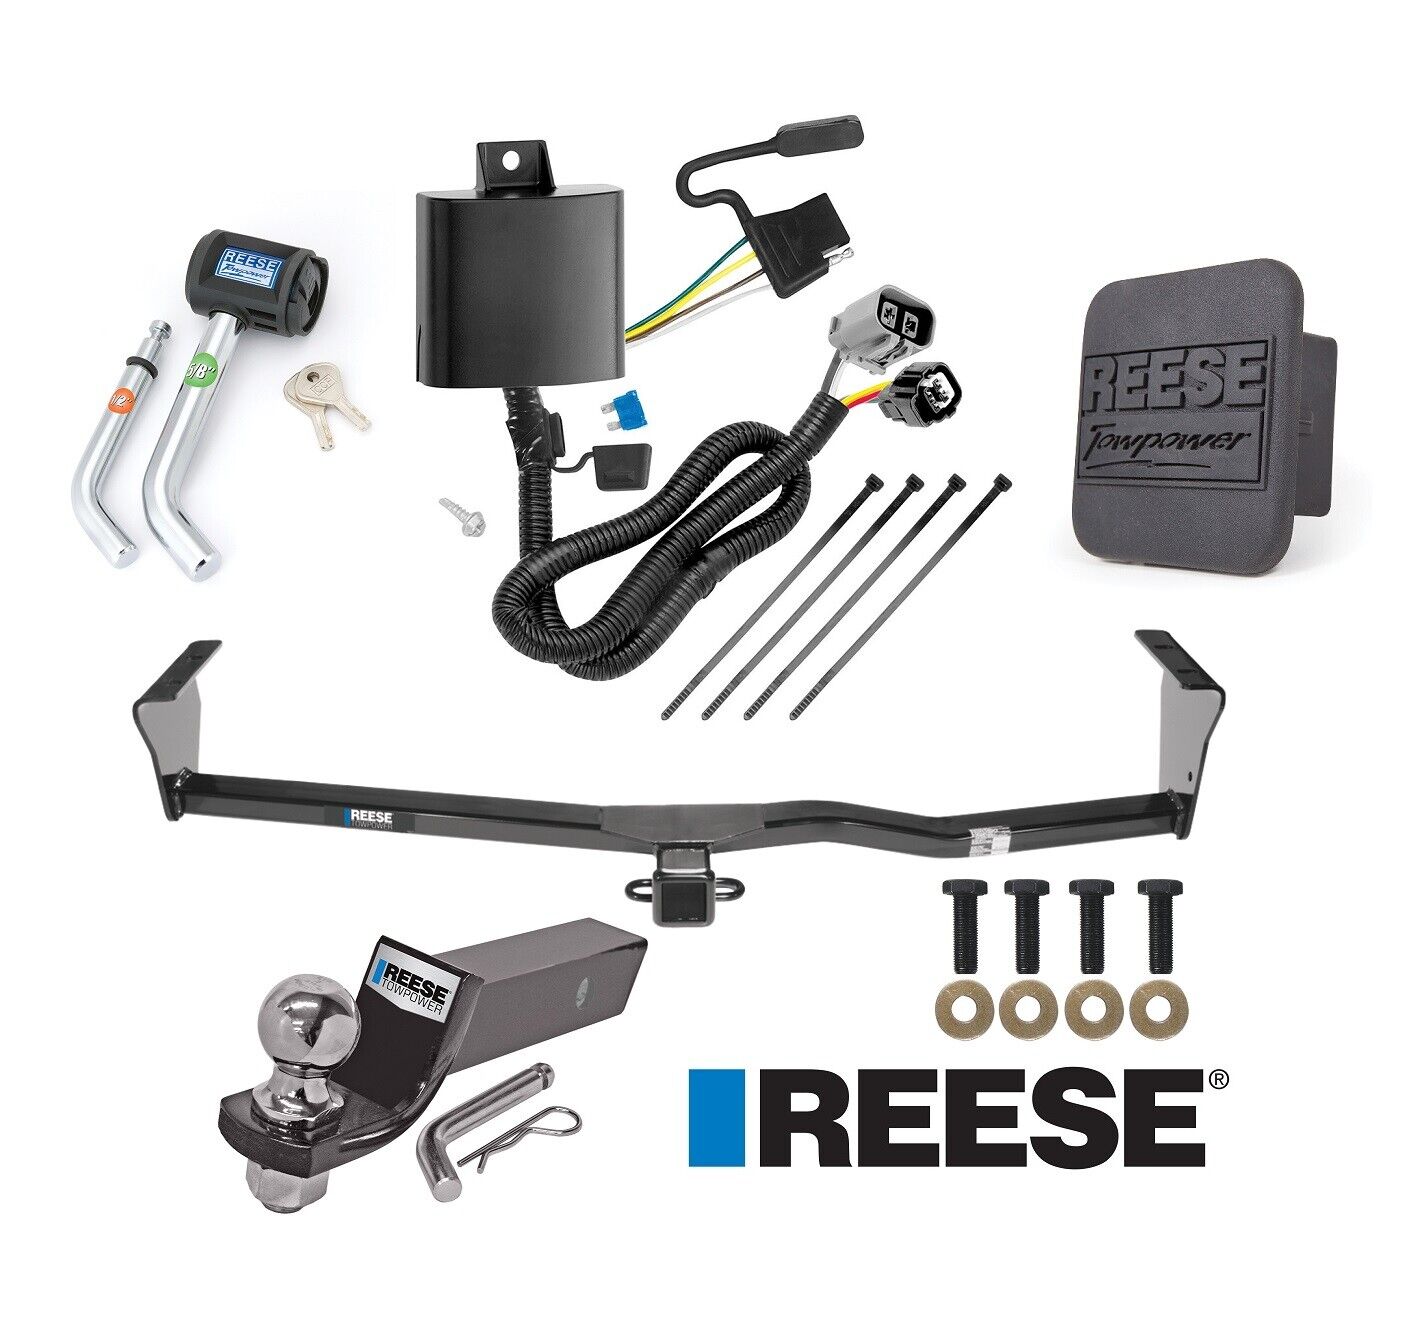 Reese Trailer Tow Hitch Max 78% OFF For 11-13 SX V6 KIA Sorento Wirin Large special price !! Deluxe